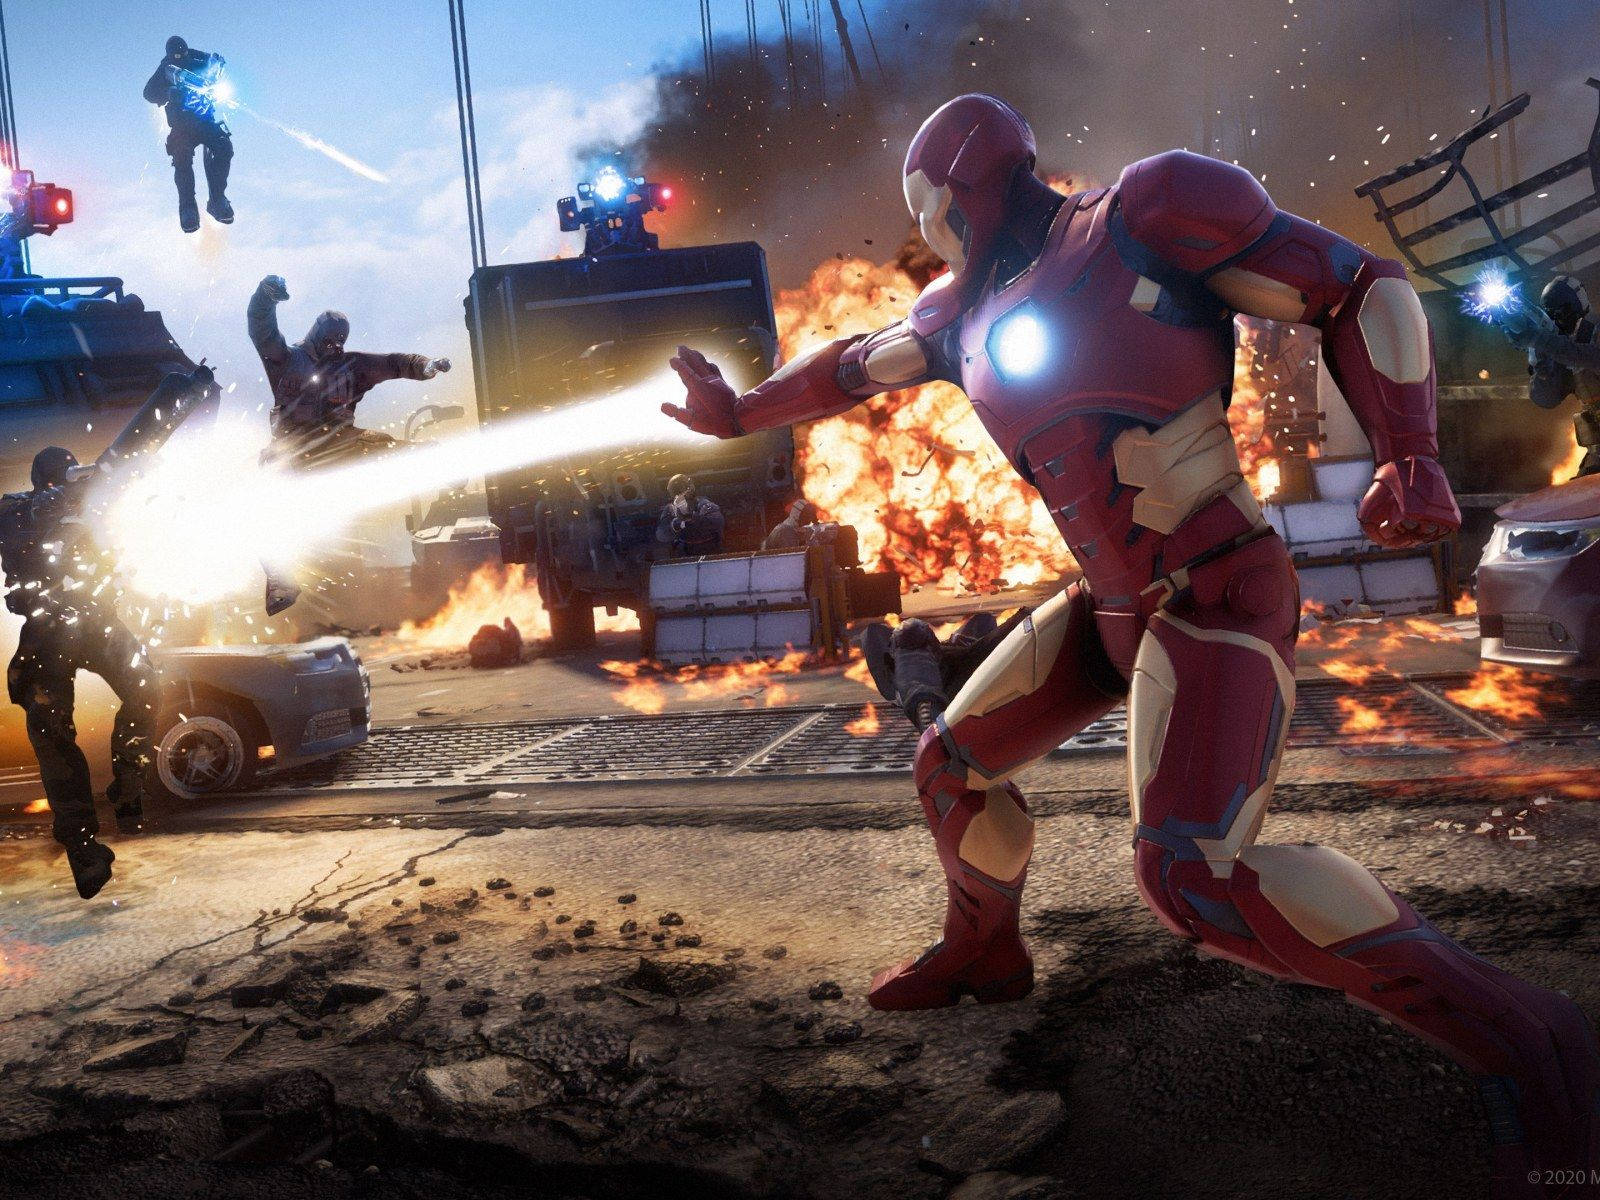 Play the epic Avengers game for PlayStation4 on the big screen. Wallpaper